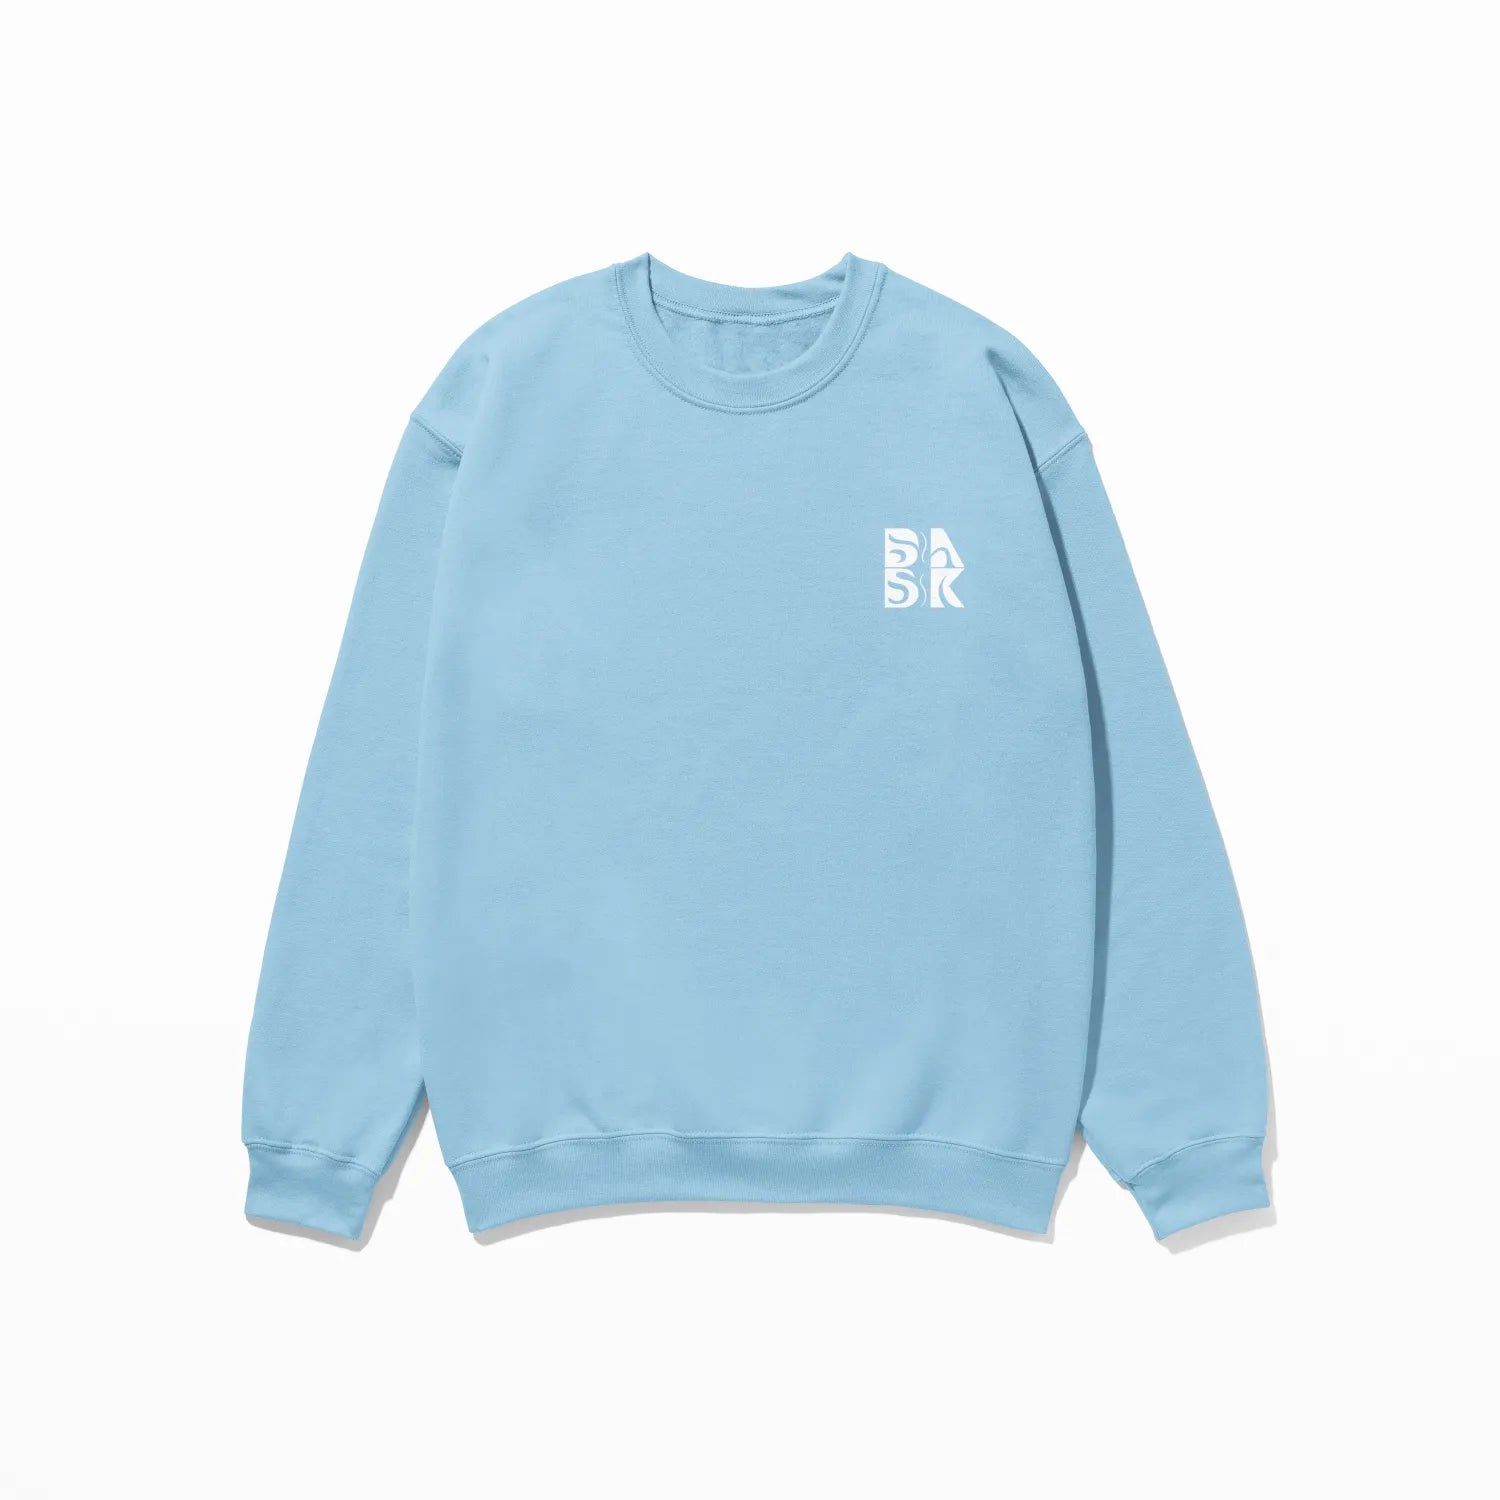 A light blue Water Walking Faith Sweatshirt with a Be Still and Know logo on it.